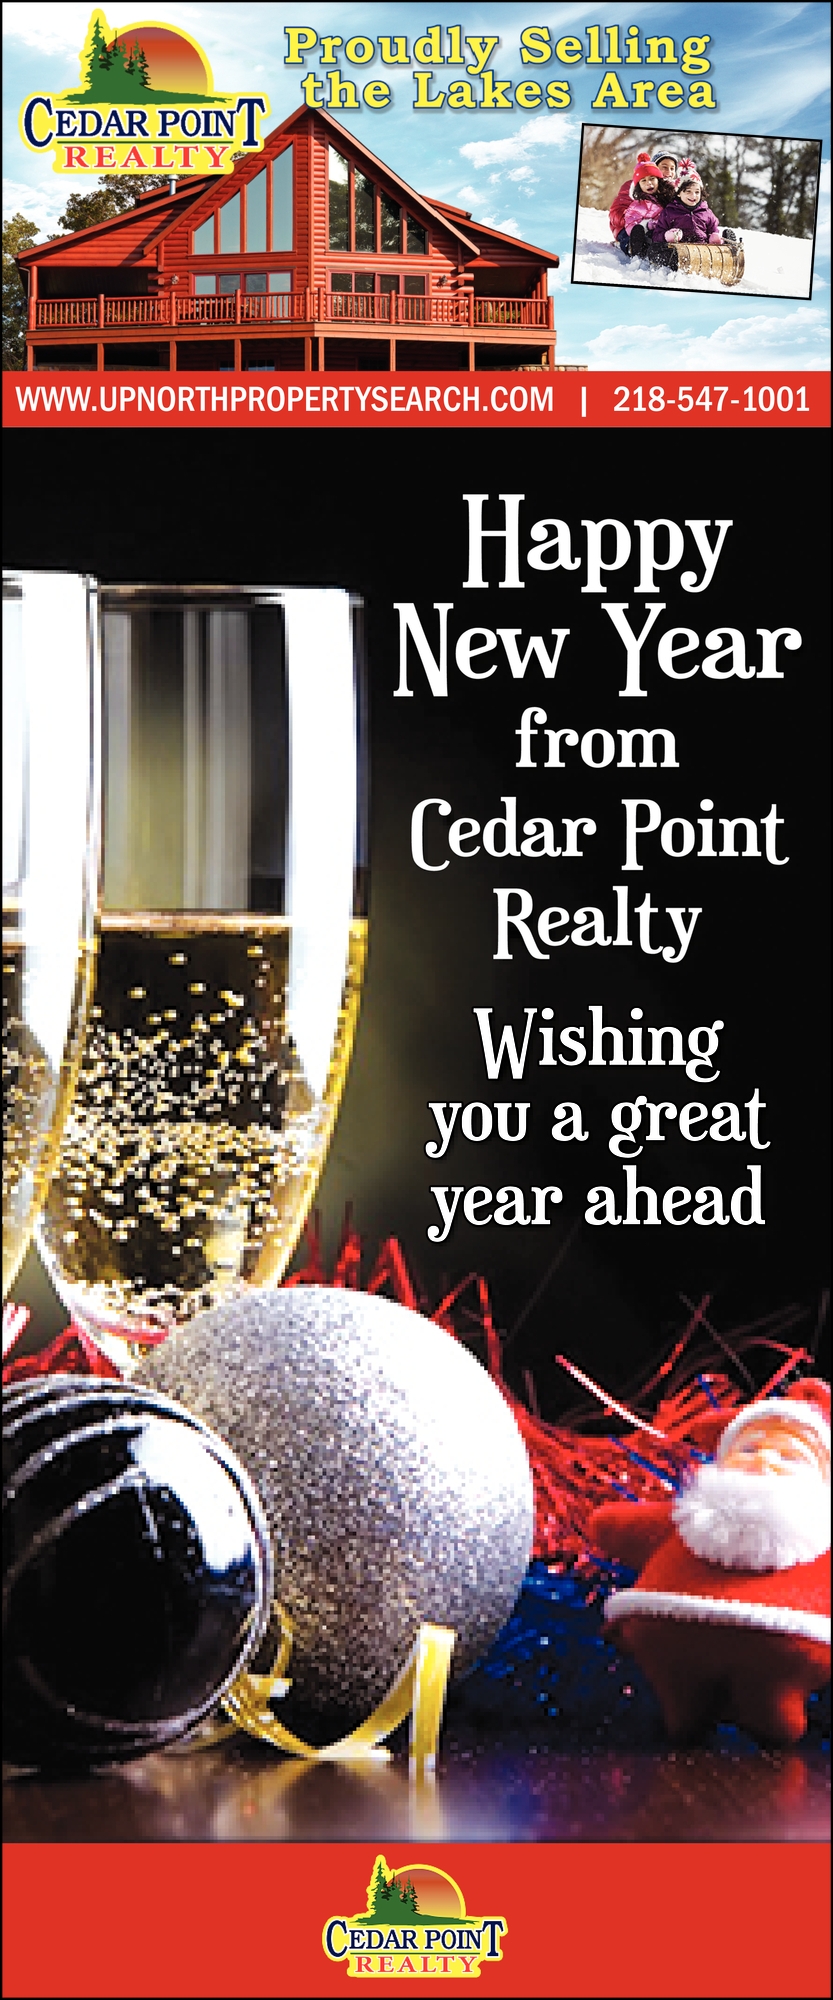 Happy New Year from Cedar Point Realty